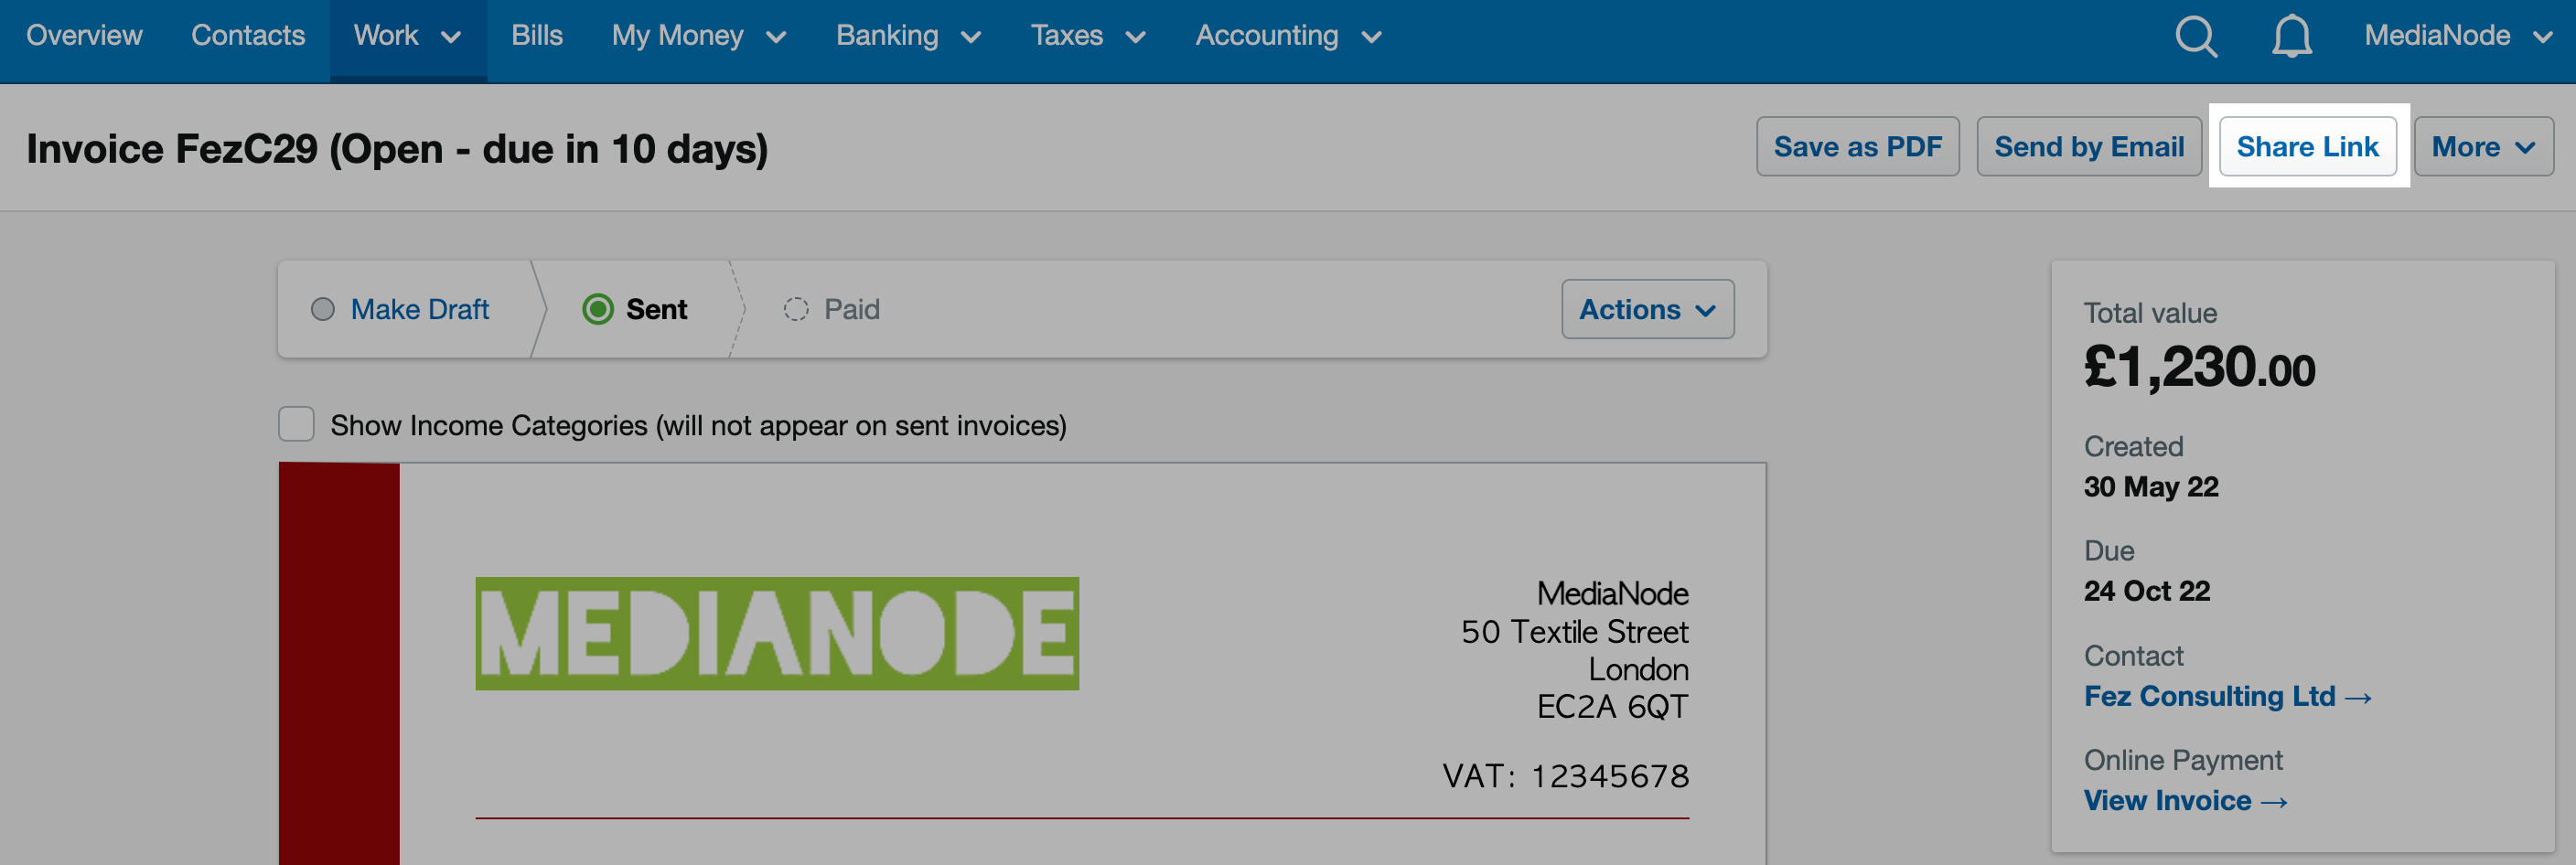 Screenshot of the invoice with the 'Share link' button highlighted